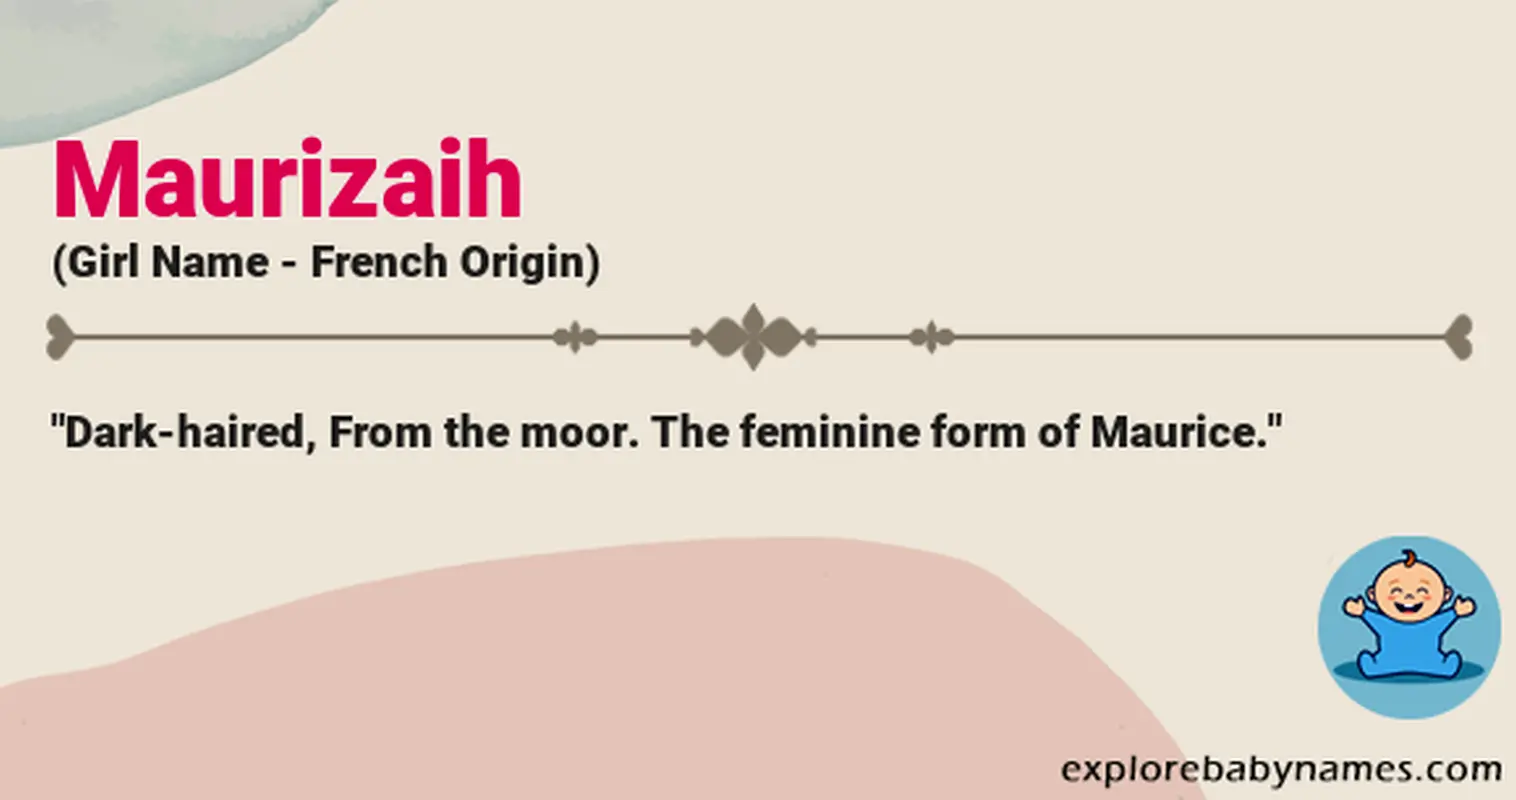 Meaning of Maurizaih